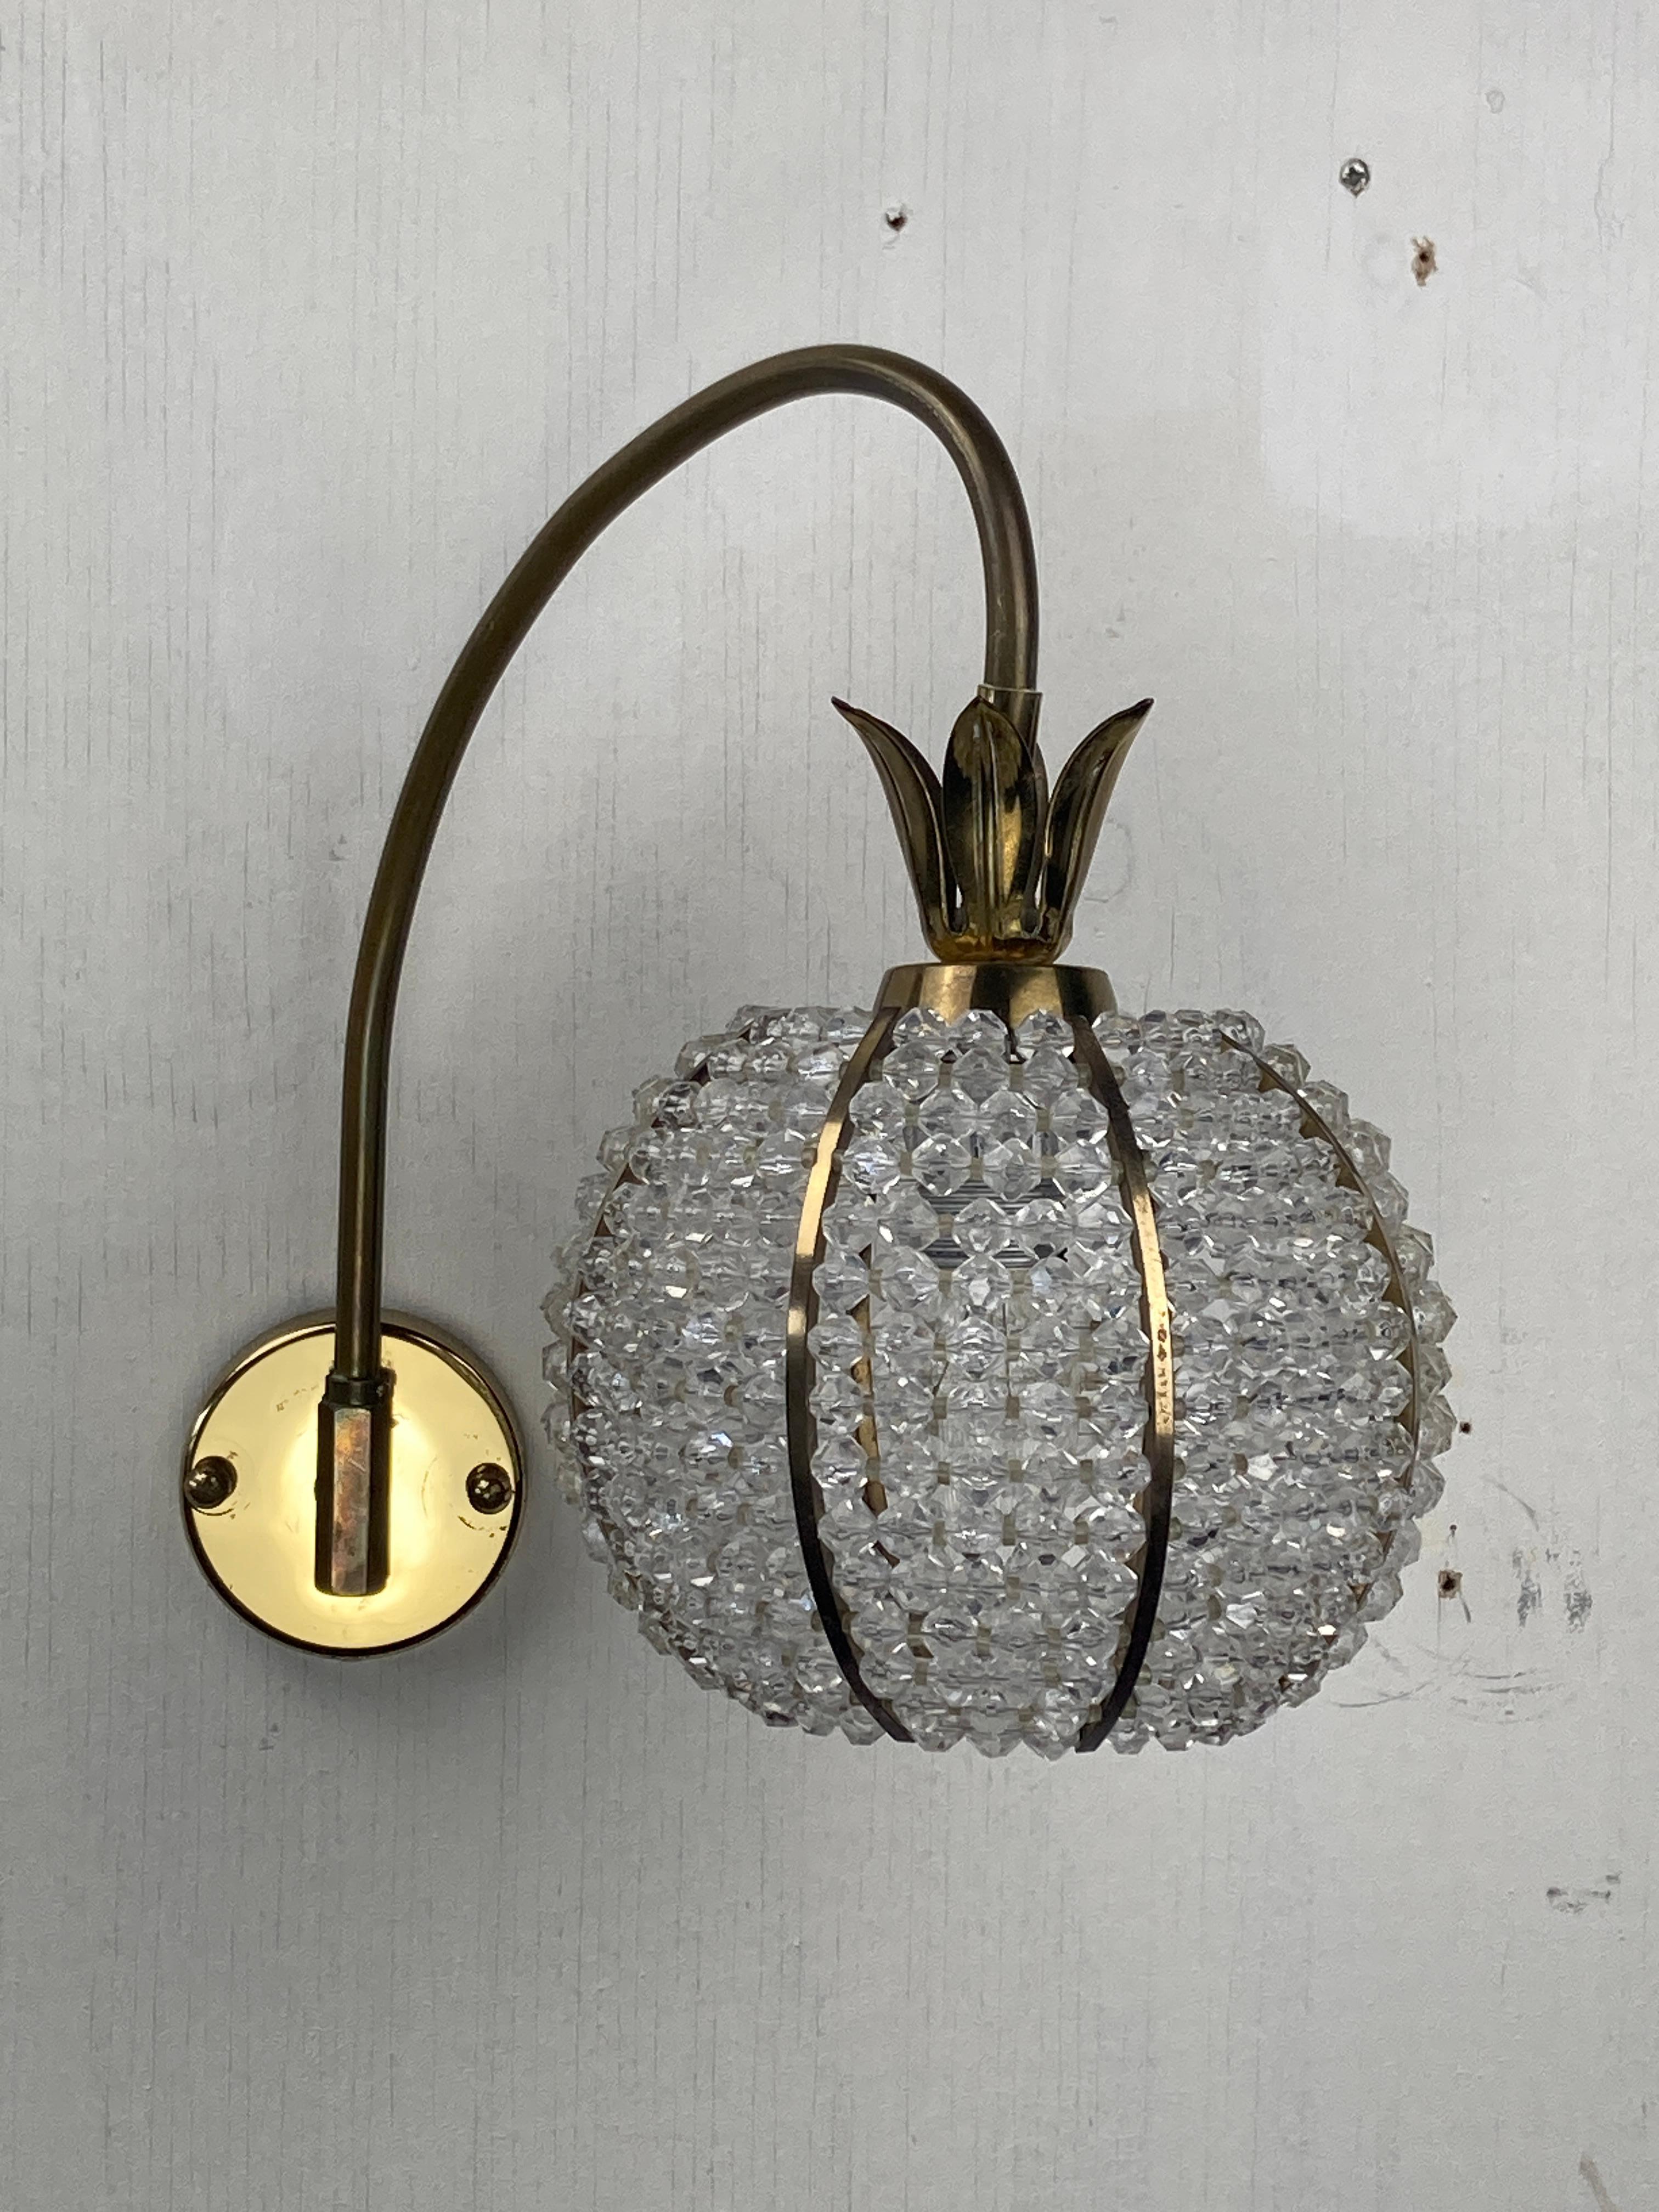 Incredibly rare set of wall sconces by Emil Stejnar for Rupert Nikoll, Austria 1960s. Generally we see these pine apple lamps in cascade pendants ( often also taken apart and sold separately as single pendants ) but to find them in their original